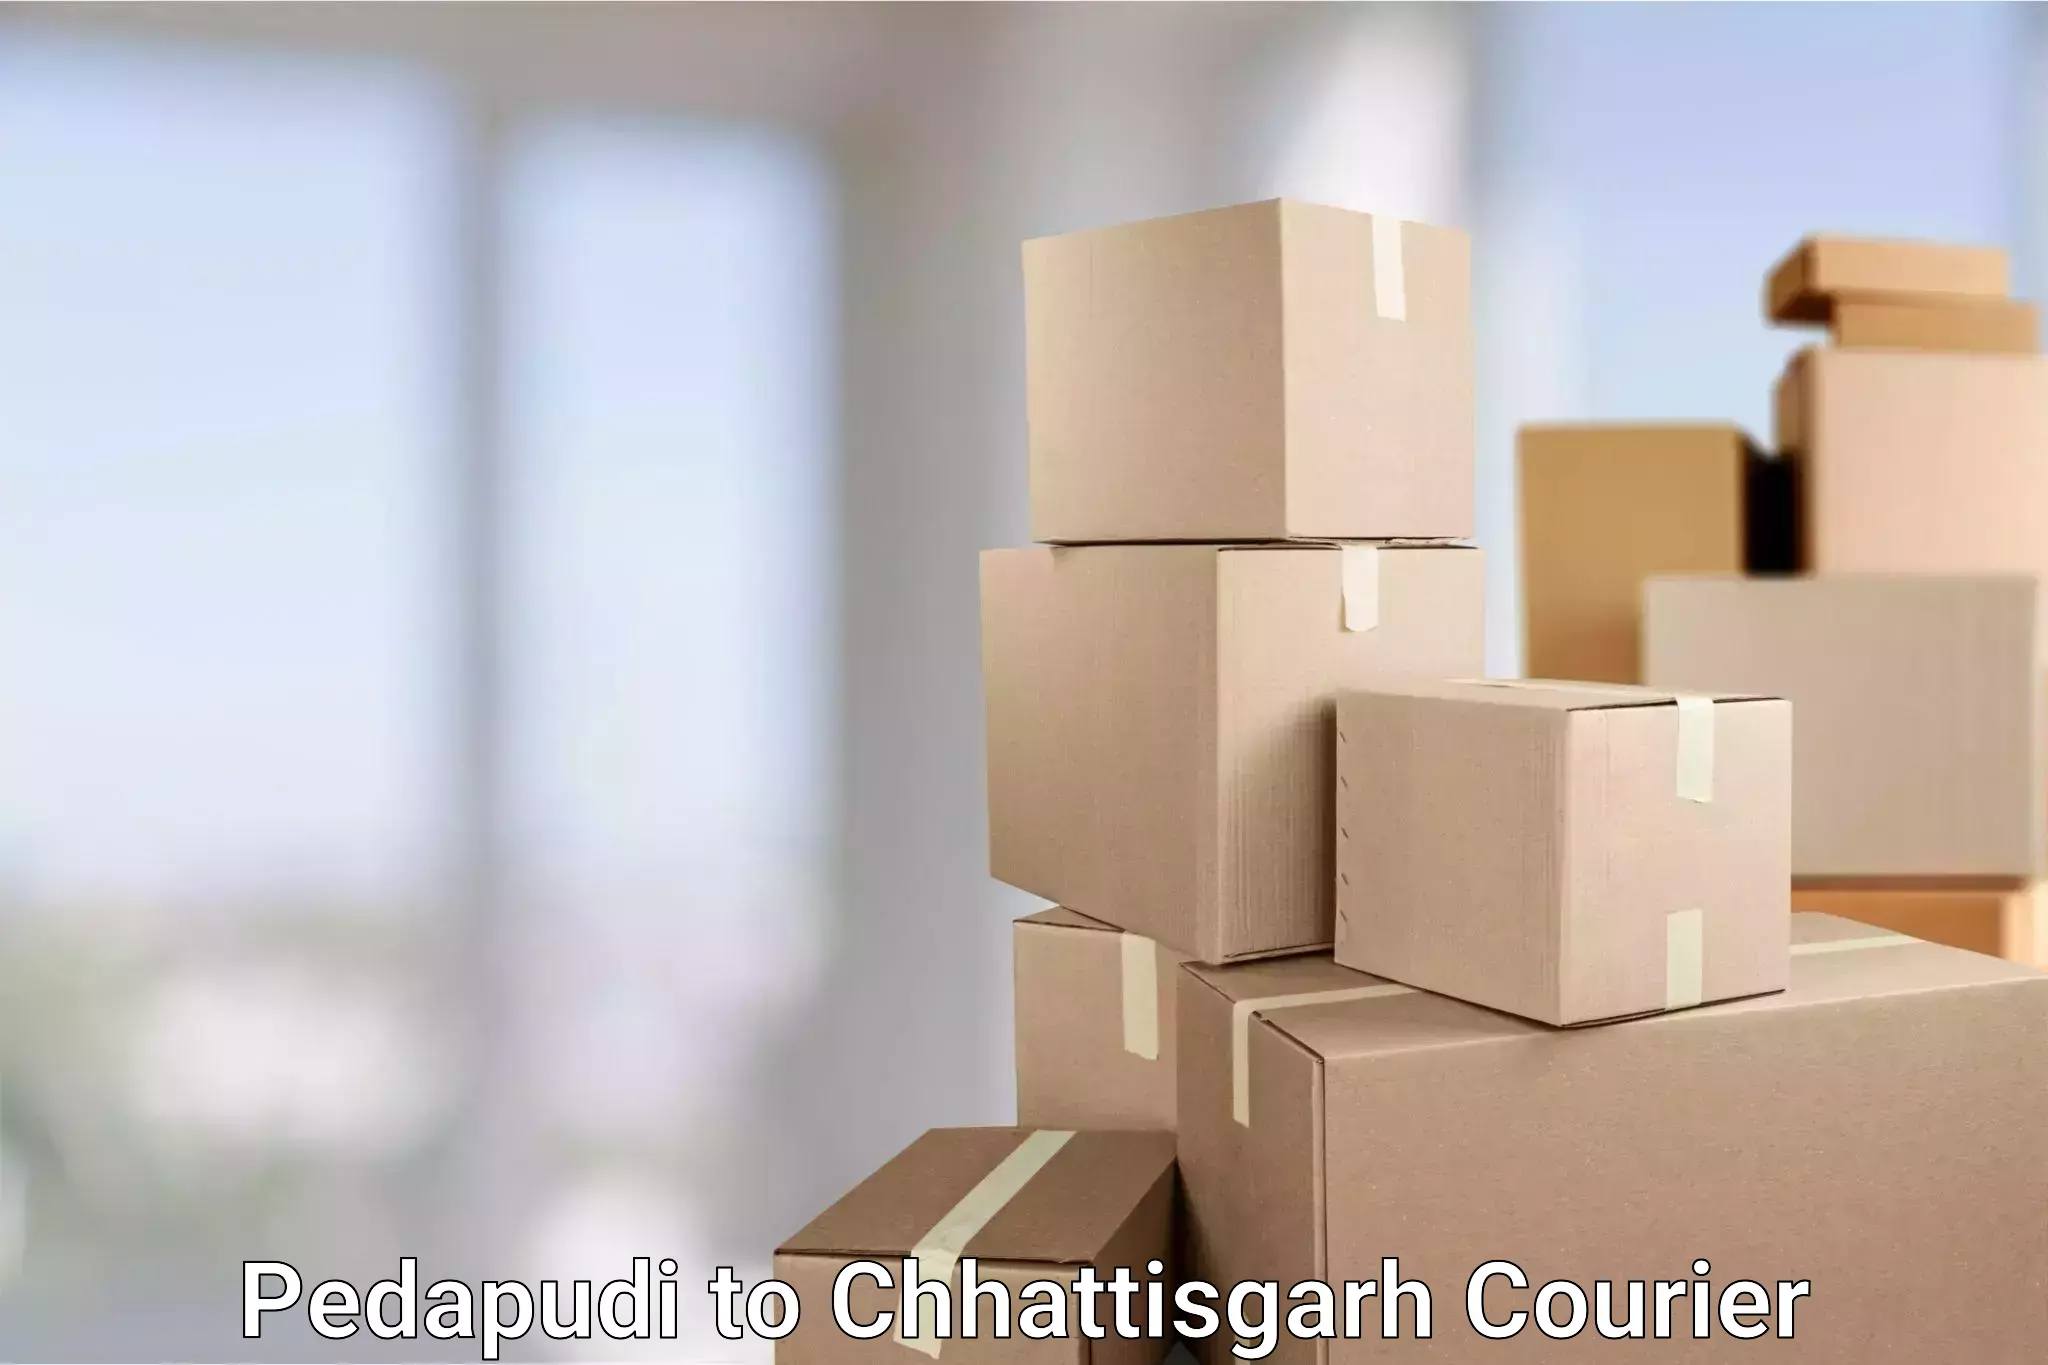 Affordable international shipping Pedapudi to bagbahra